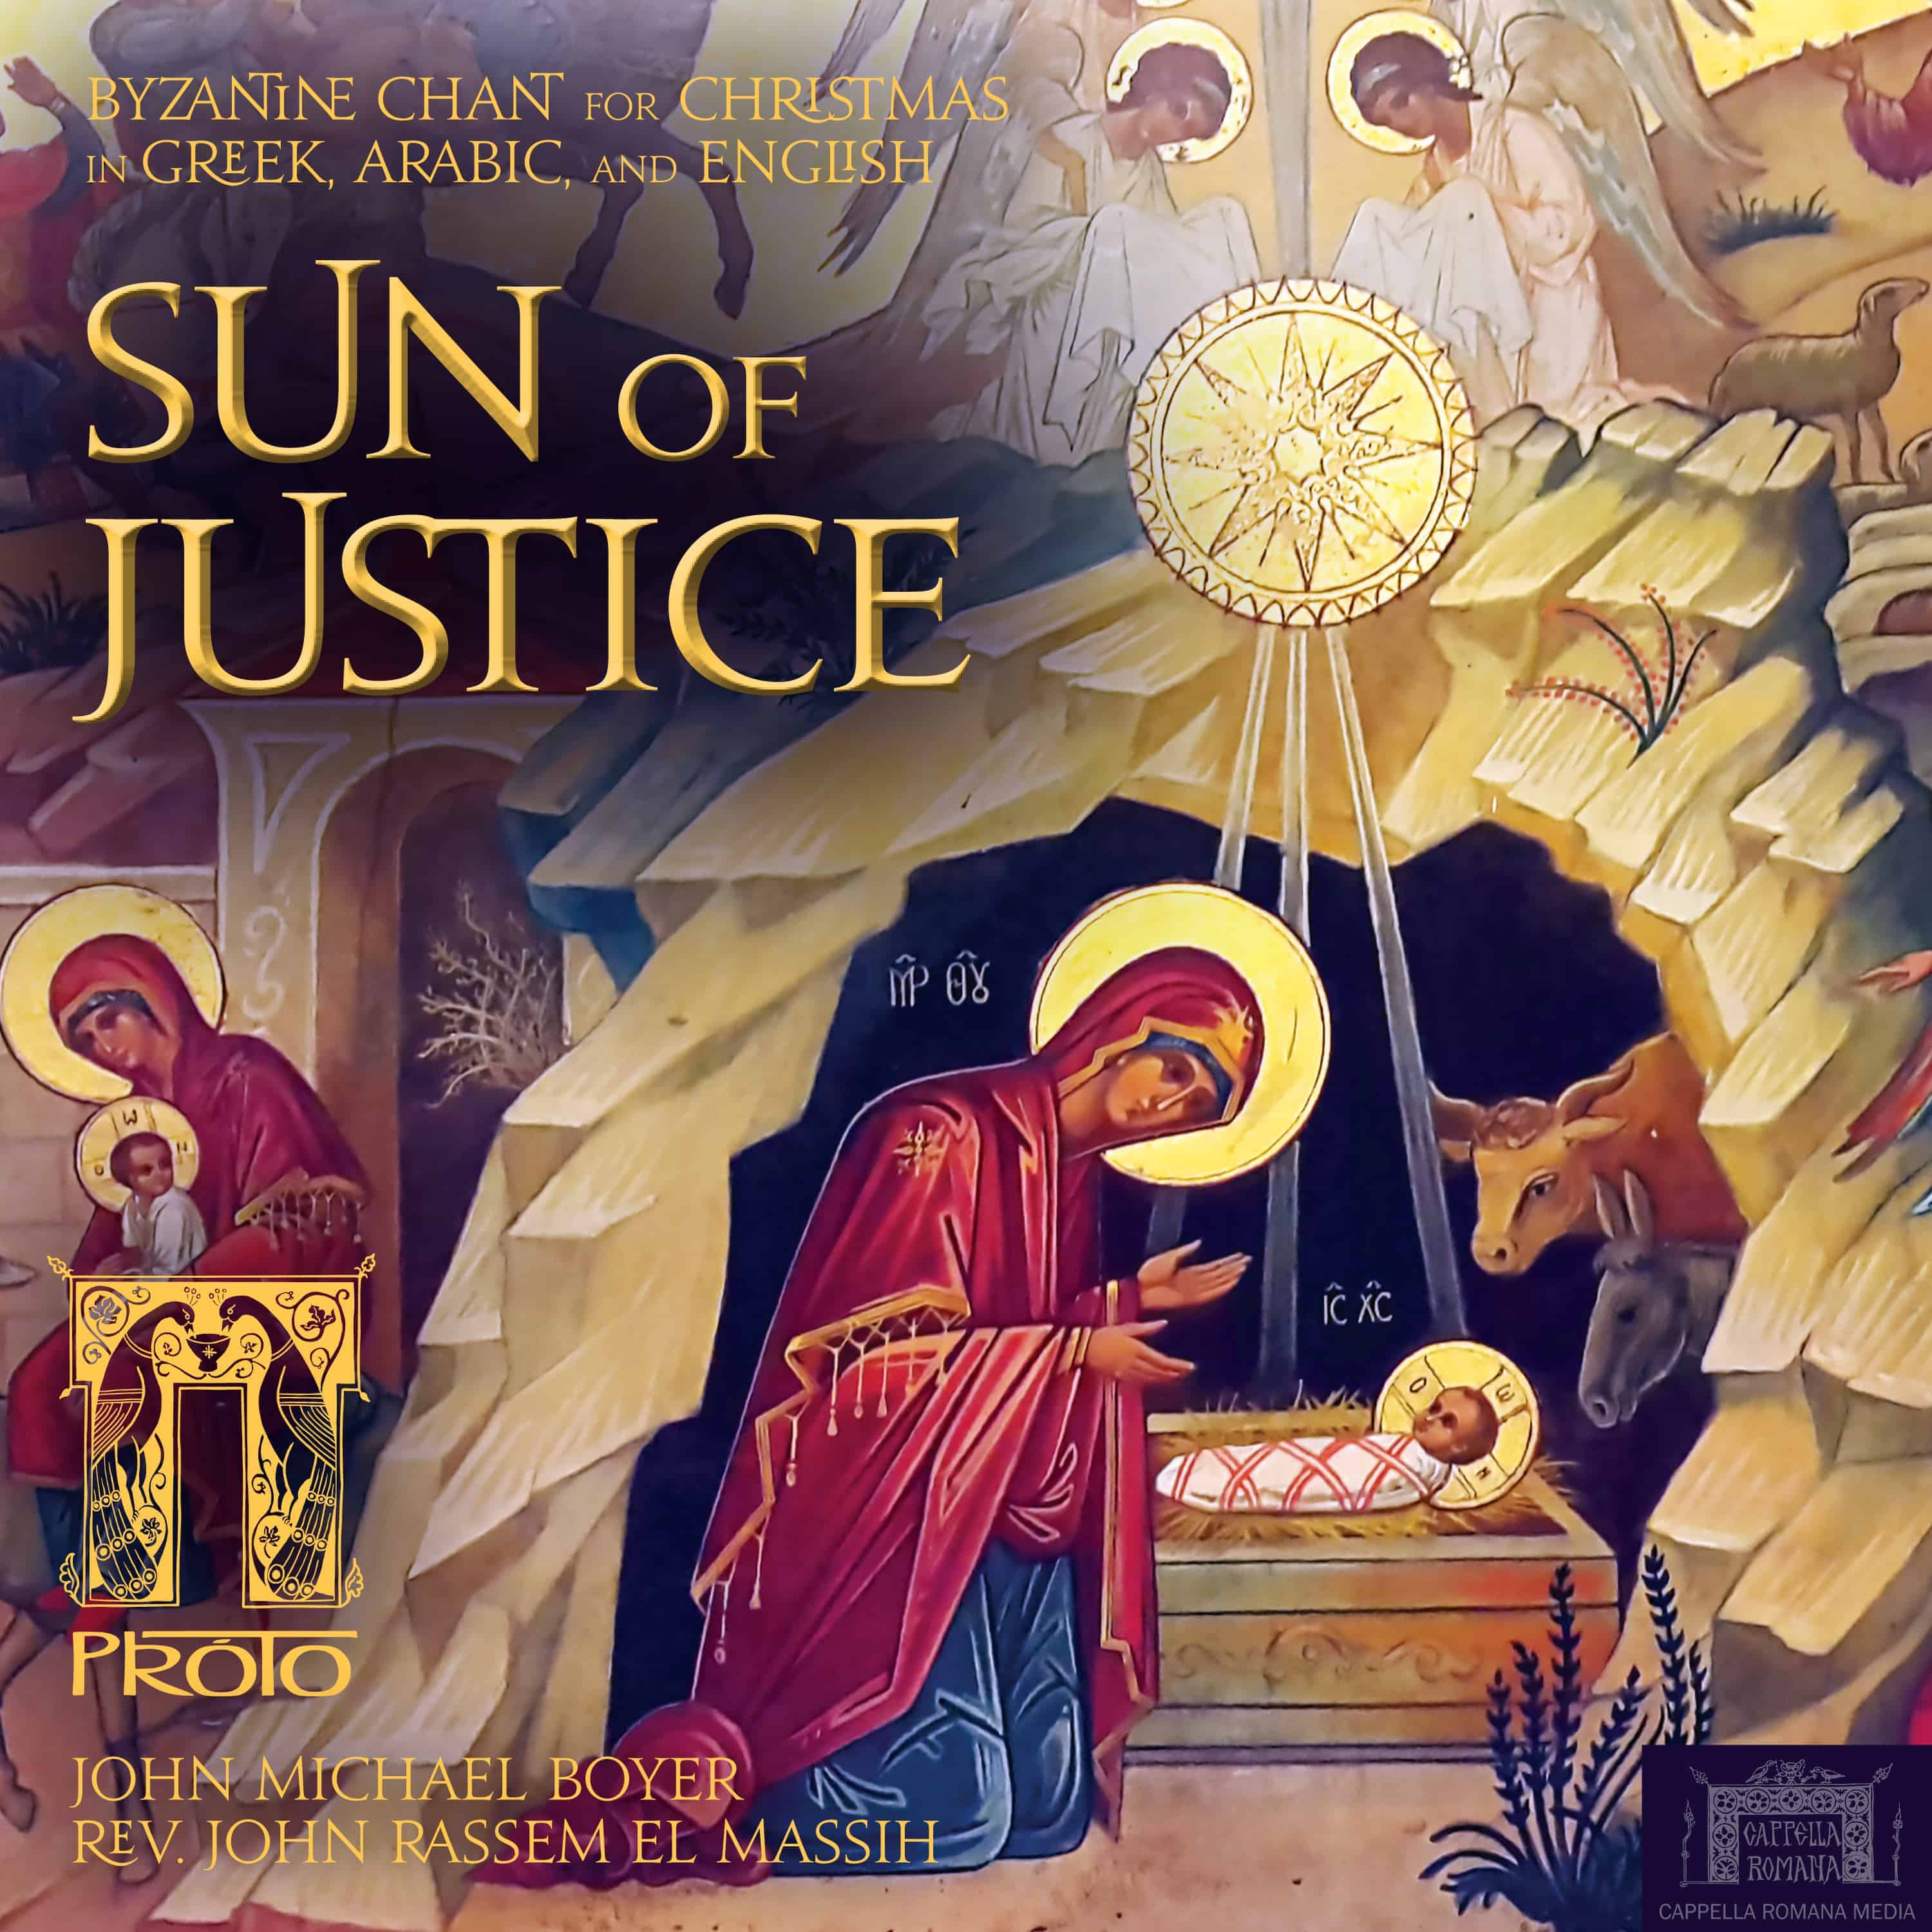 Why “Sun of Justice”?